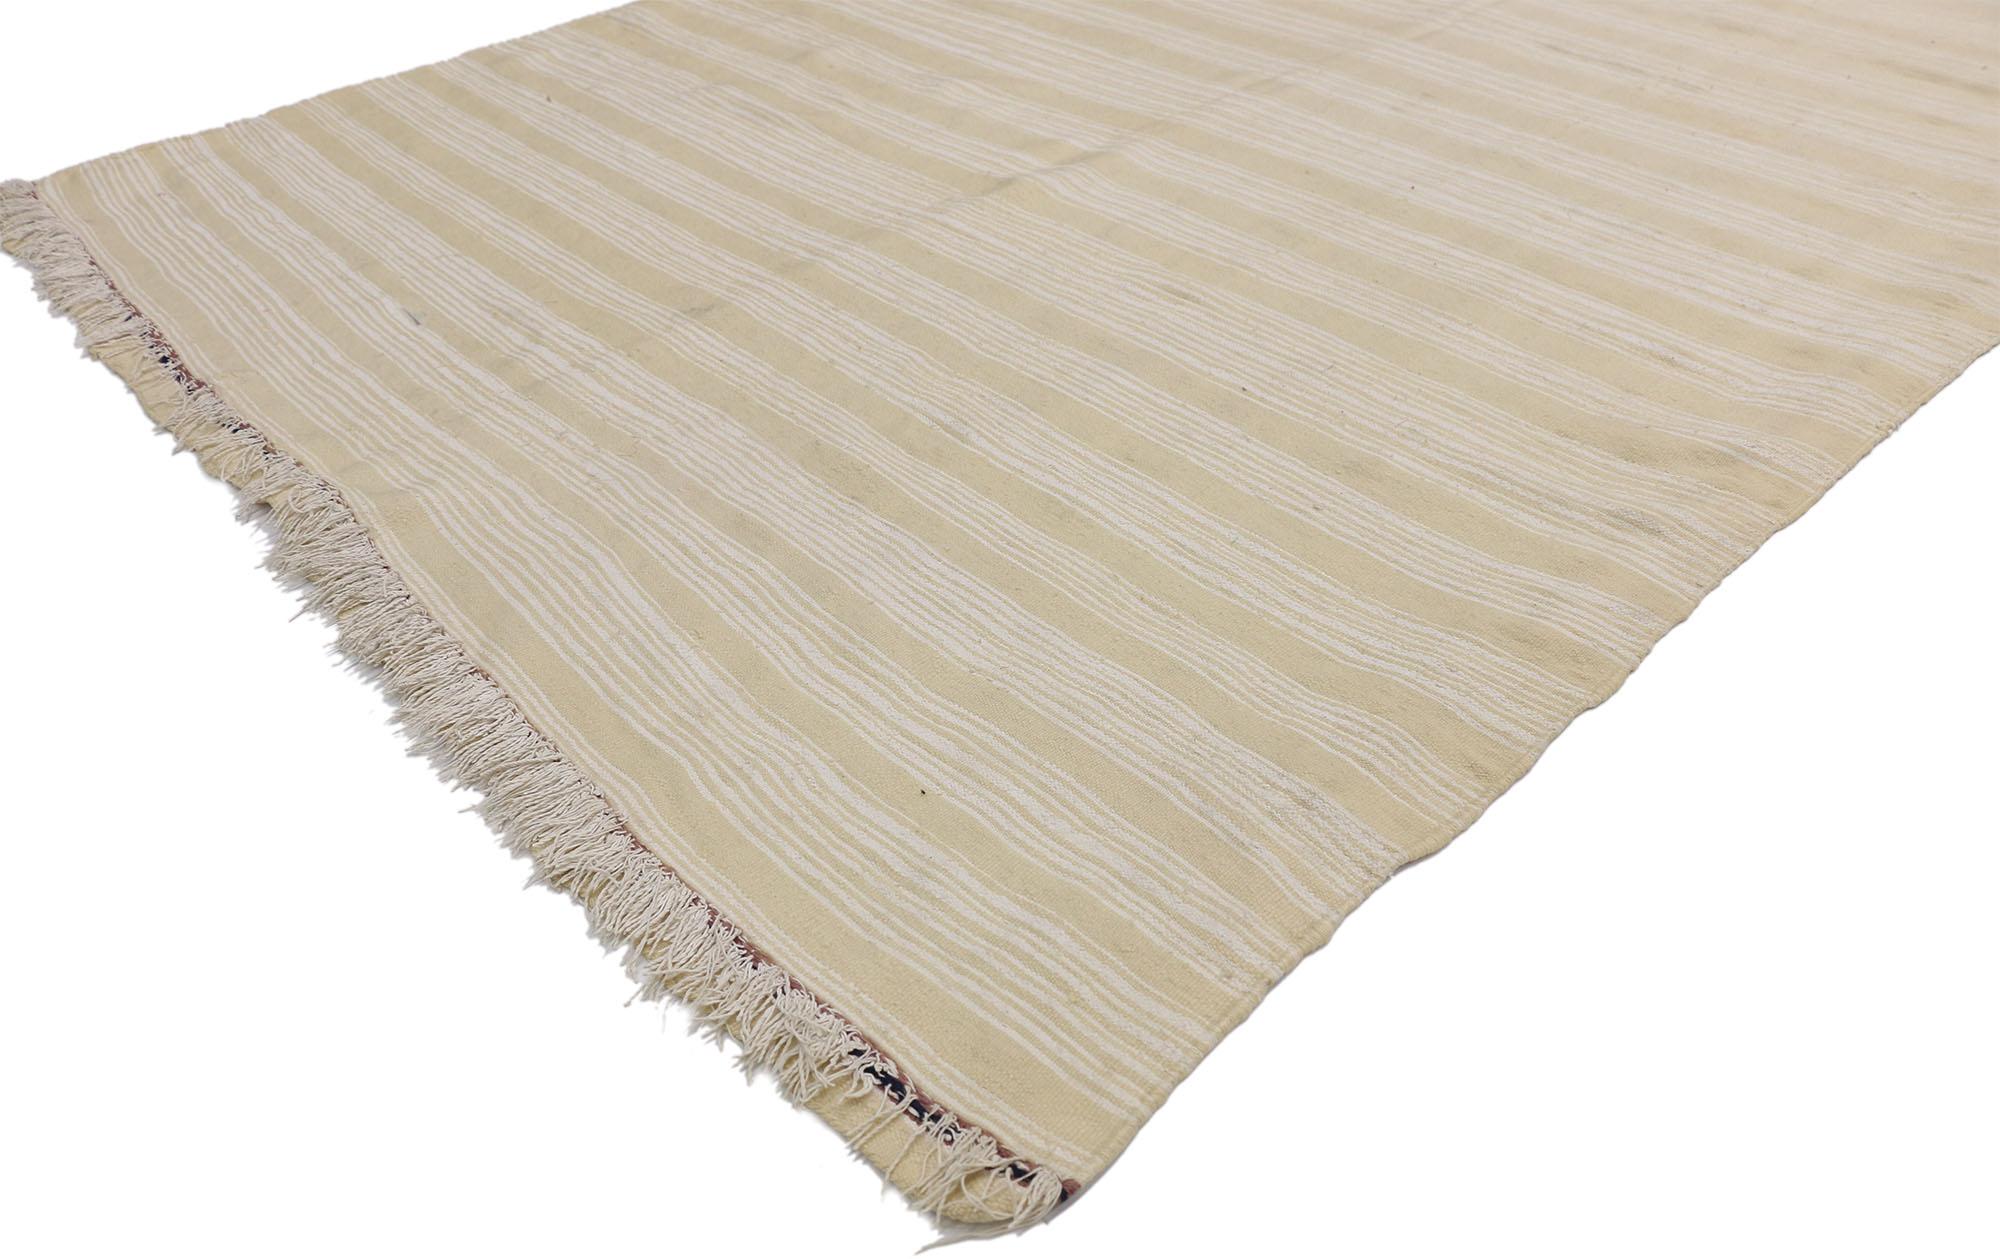 20815, Vintage Moroccan Handira Kilim, Neutral Flat-weave Rug. This neutral flat-weave Kilim rug emanates function and versatility with relaxed hygge vibes. This handwoven wool vintage Moroccan Kilim rug features rows of creamy-vanilla bands and